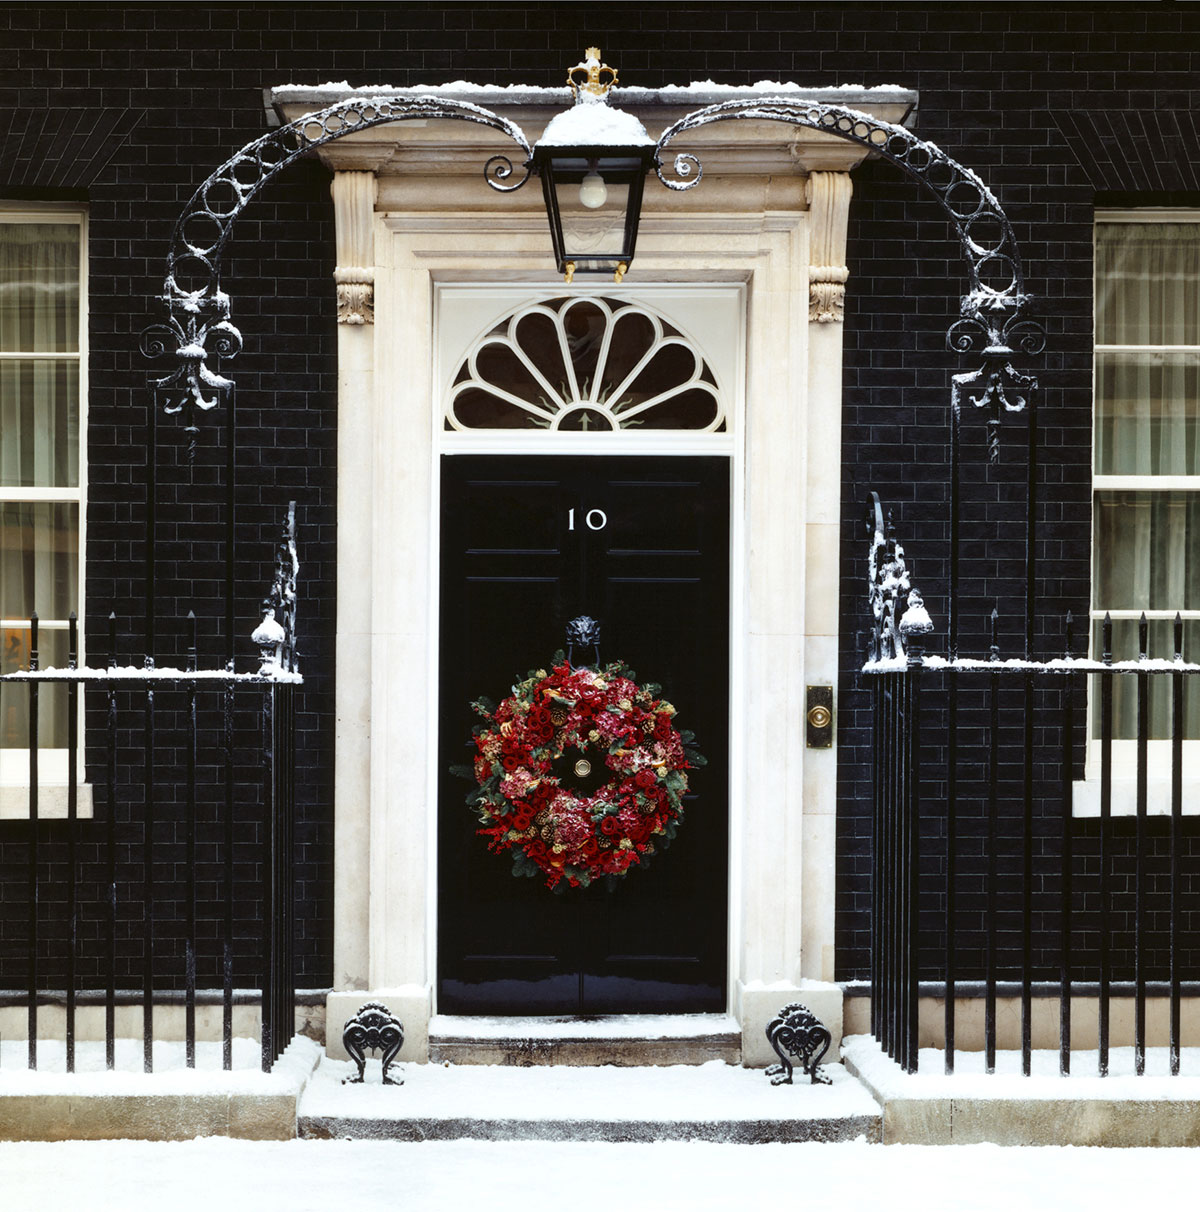 Snow Business frost effect on 10 Downing Street